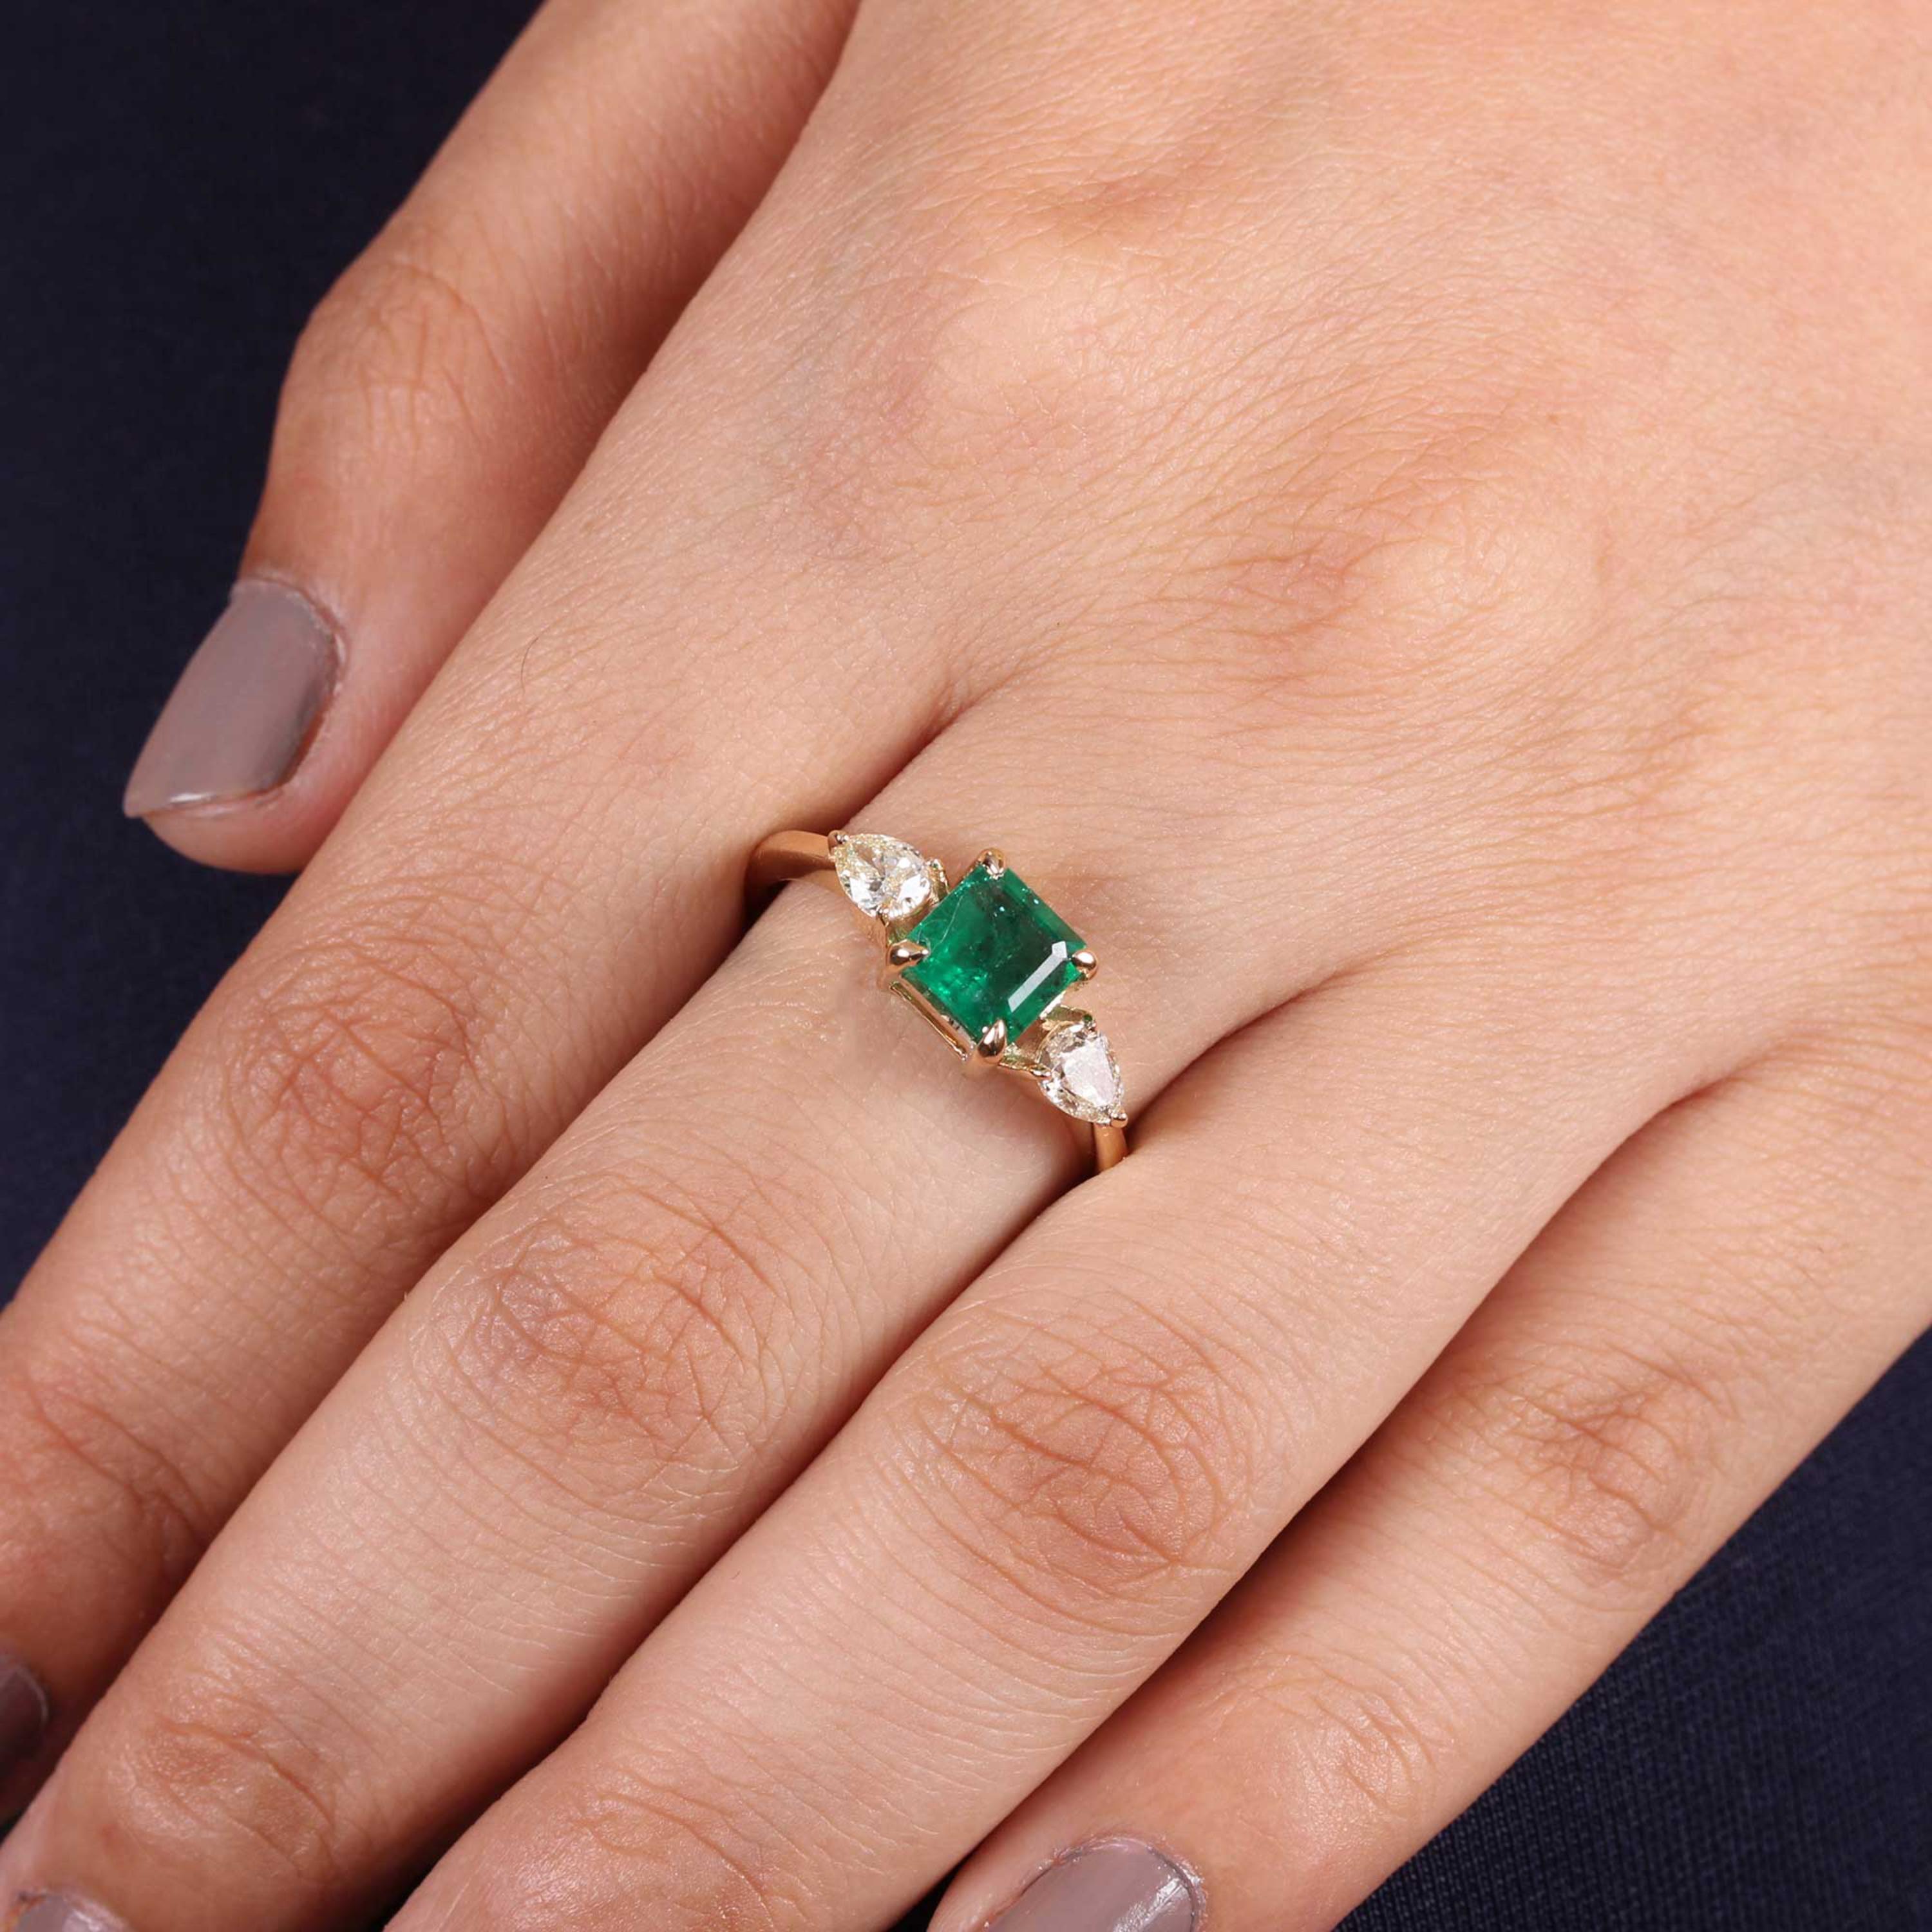 18K Gold Natural Emerald Diamond Art Deco Style Engagement Ring Bridal Ring

A stunning ring featuring IGI/GIA Certified 1.08 Carat Natural Emerald and 0.48 Carat of Diamond Accents set in 18K Solid Gold.

Emeralds are highly valued for their